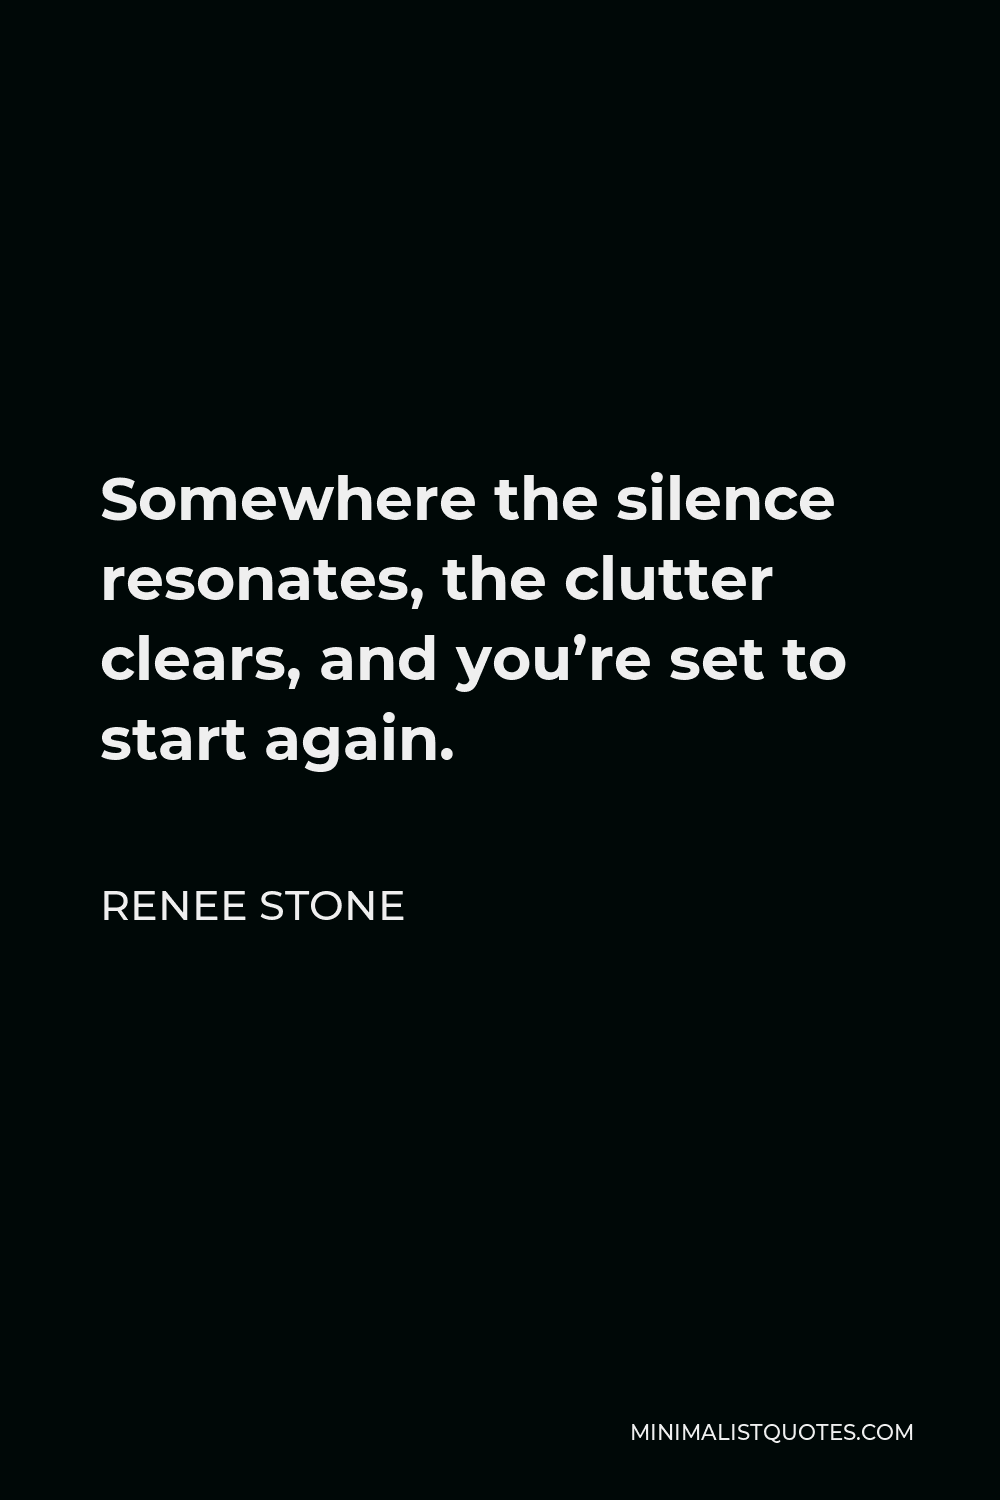 Renee Stone Quote - Somewhere the silence resonates, the clutter clears, and you’re set to start again.